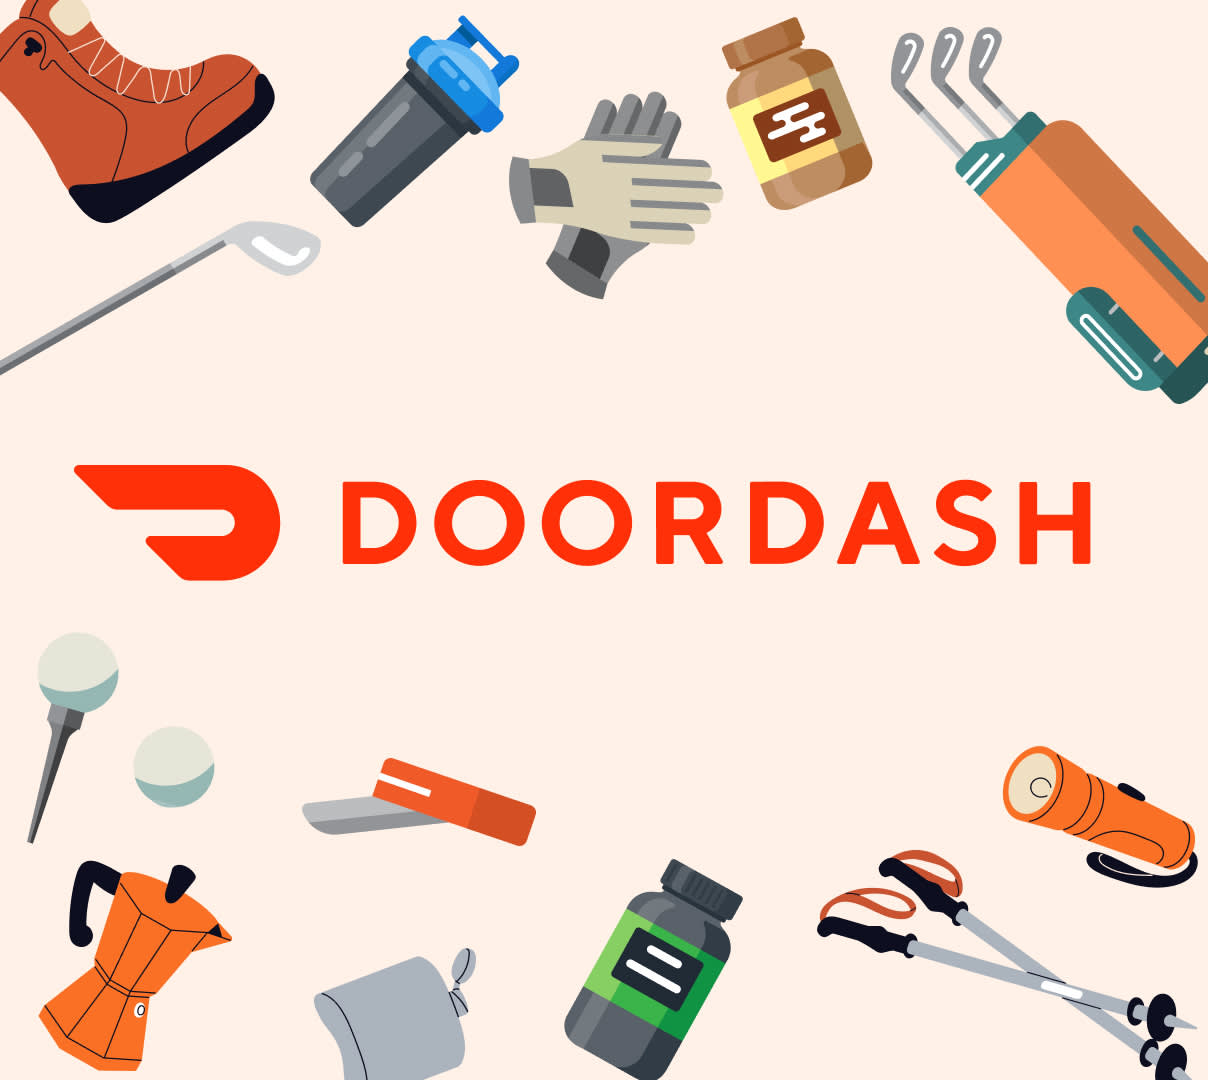 DoorDash Announces Multiple Retail Partners To Kickstart an Active and Healthy New Year